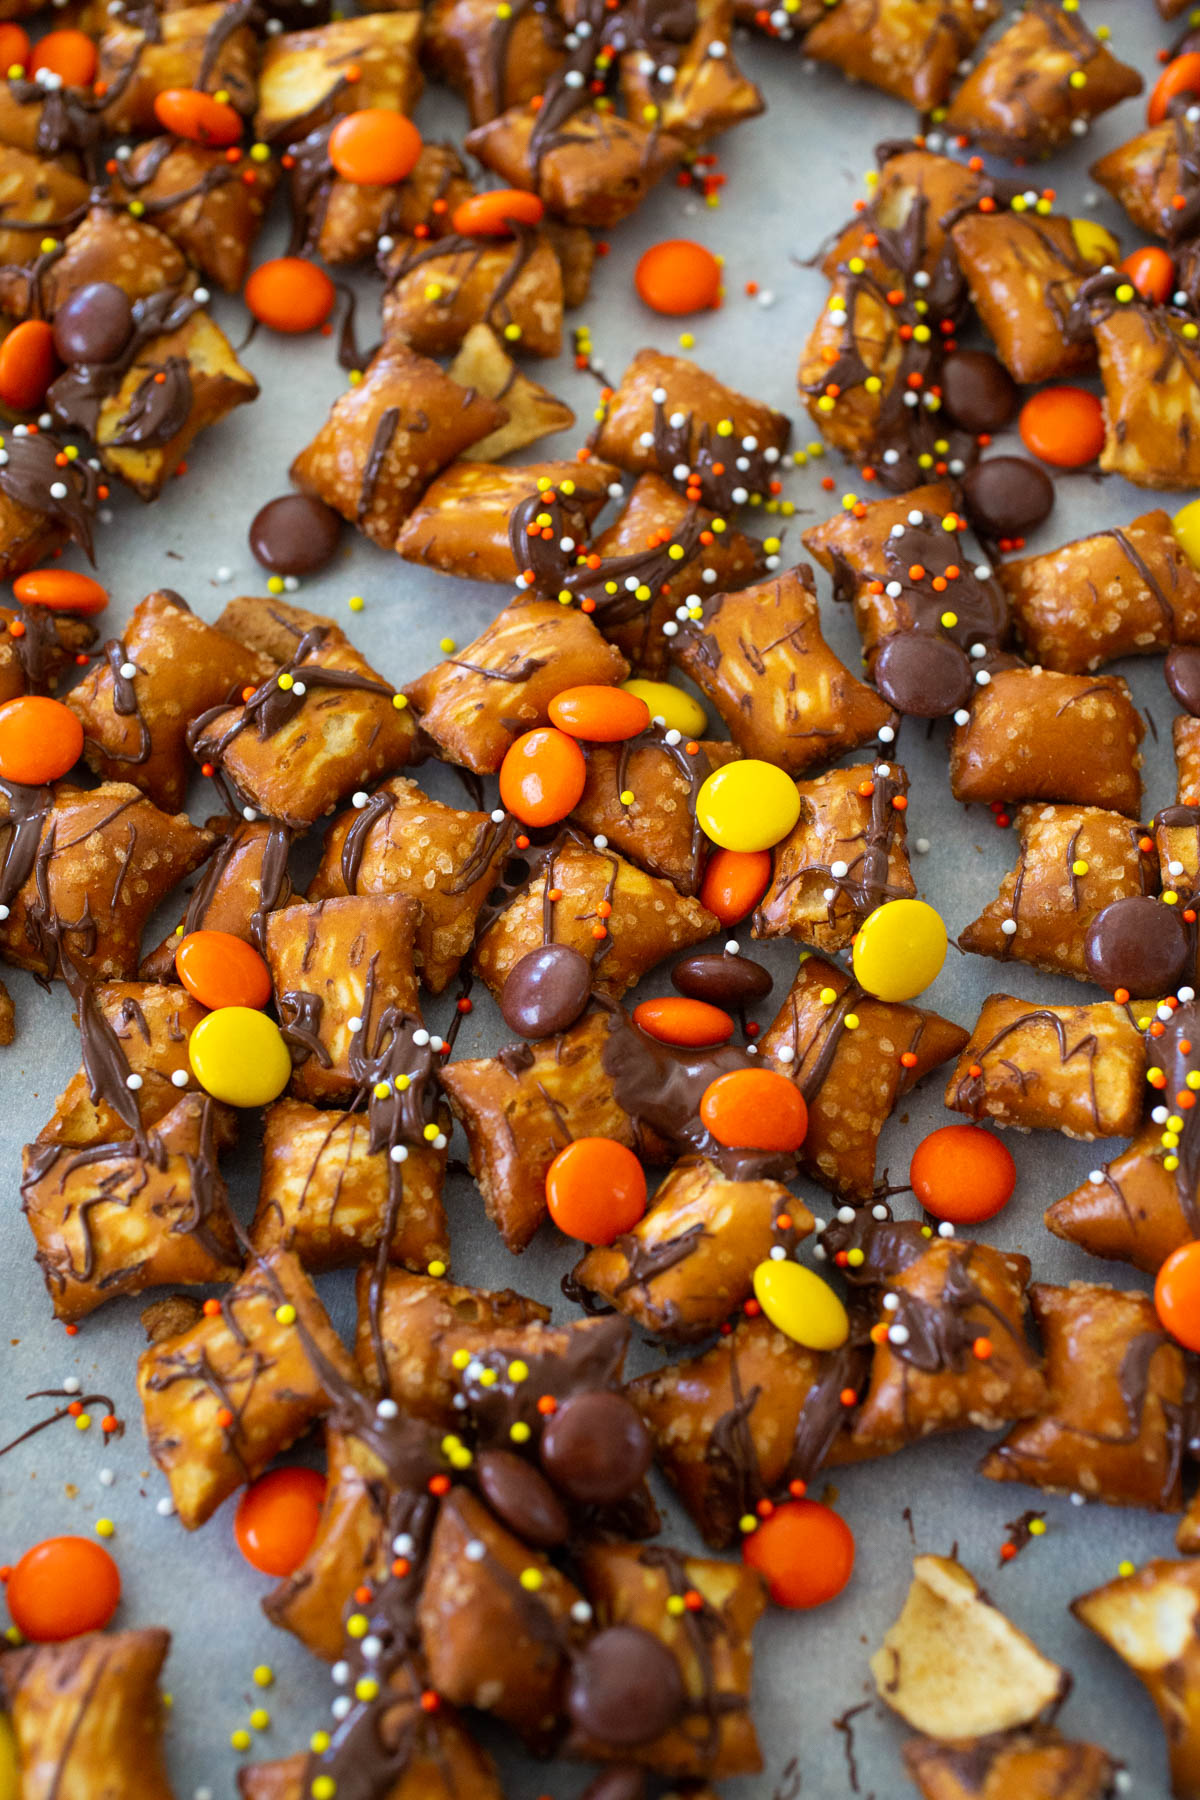 The peanut butter pretzel nuggets have been drizzled in chocolate with sprinkles and orange and yellow candies.